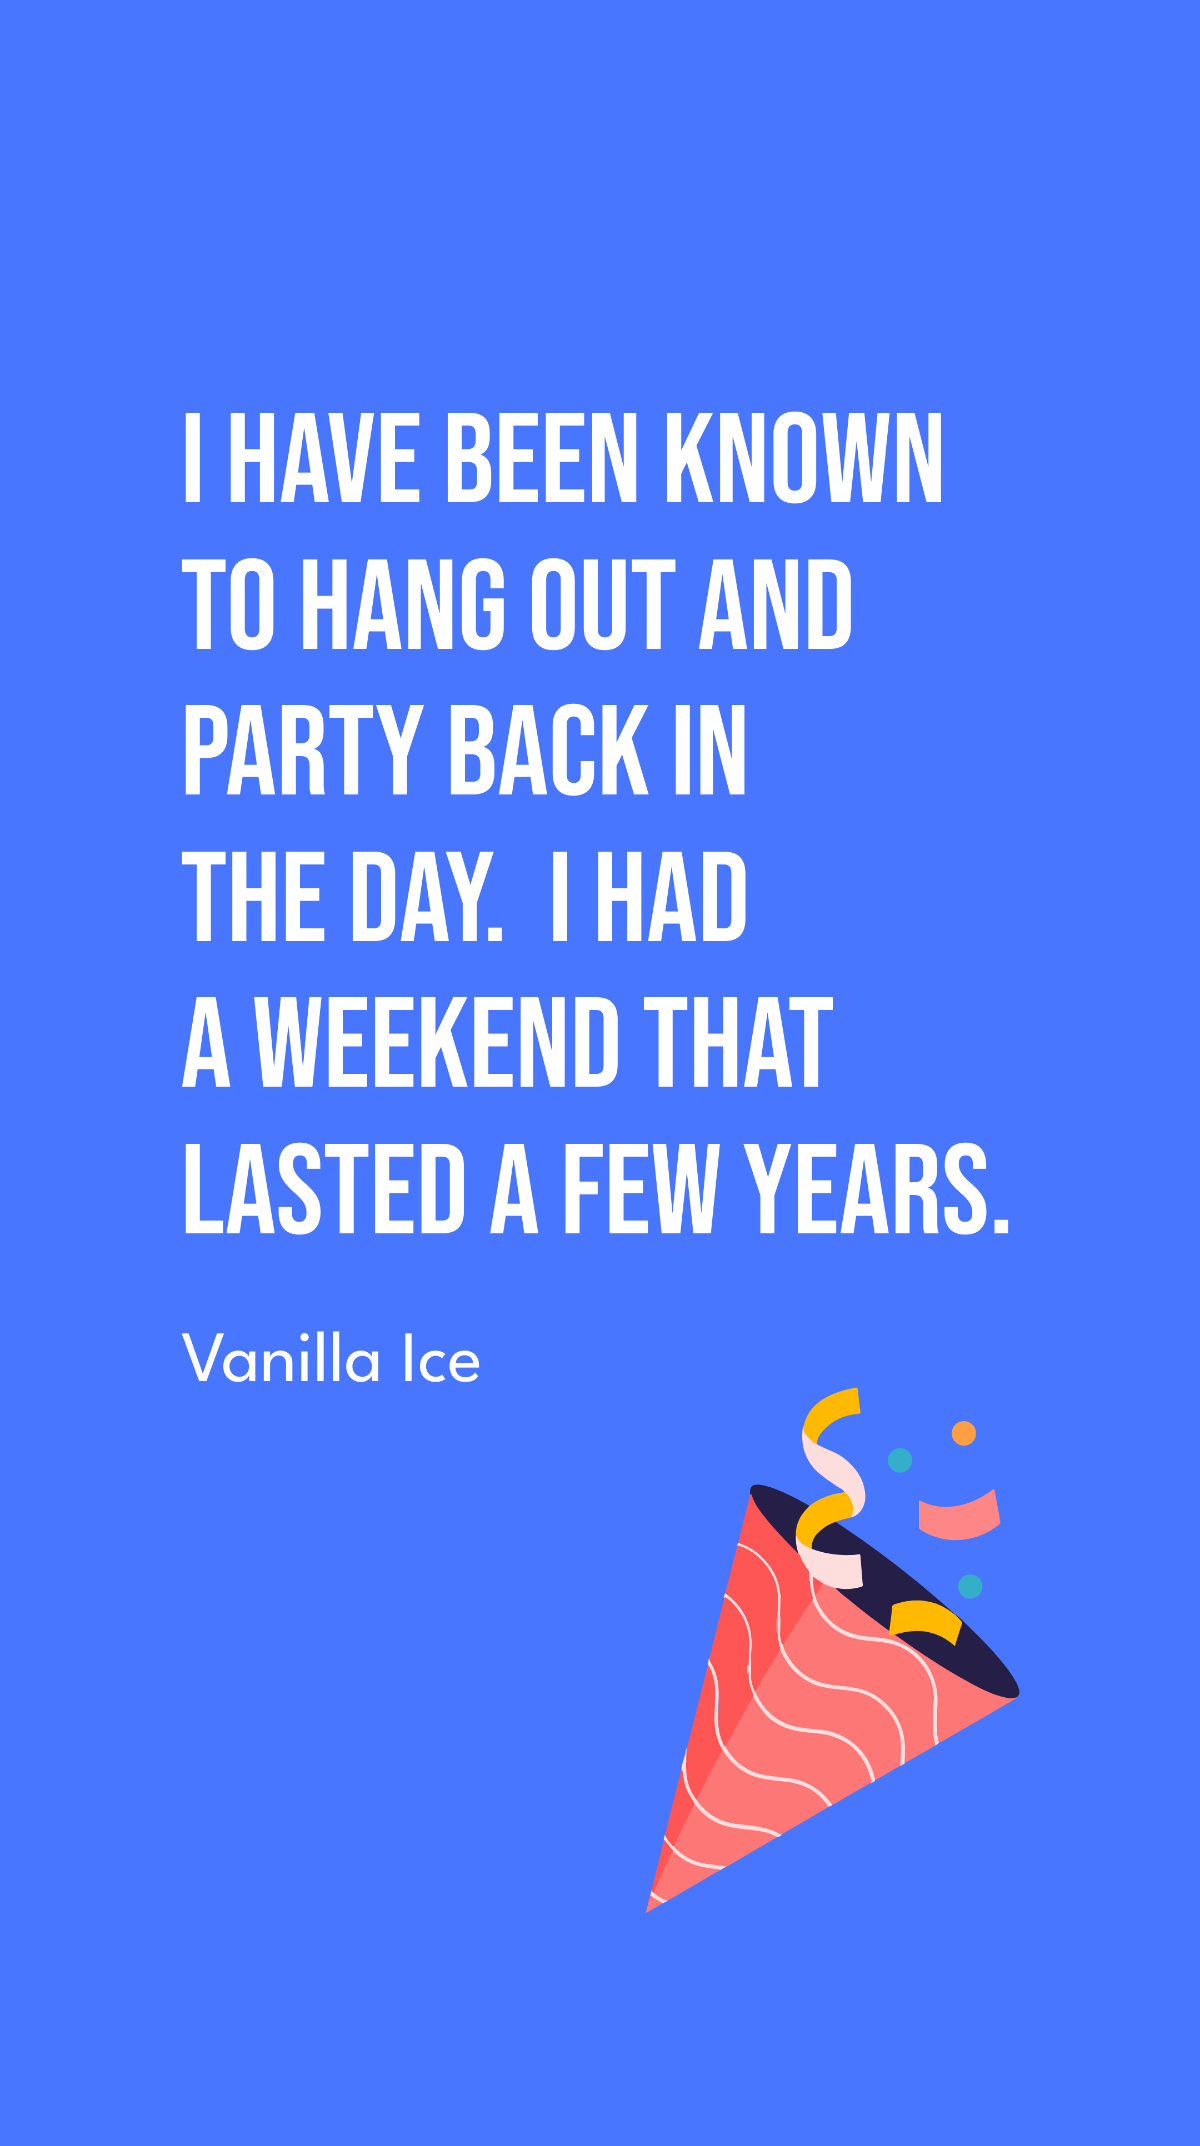 Vanilla Ice - I have been known to hang out and party back in the day. I had a weekend that lasted a few years.